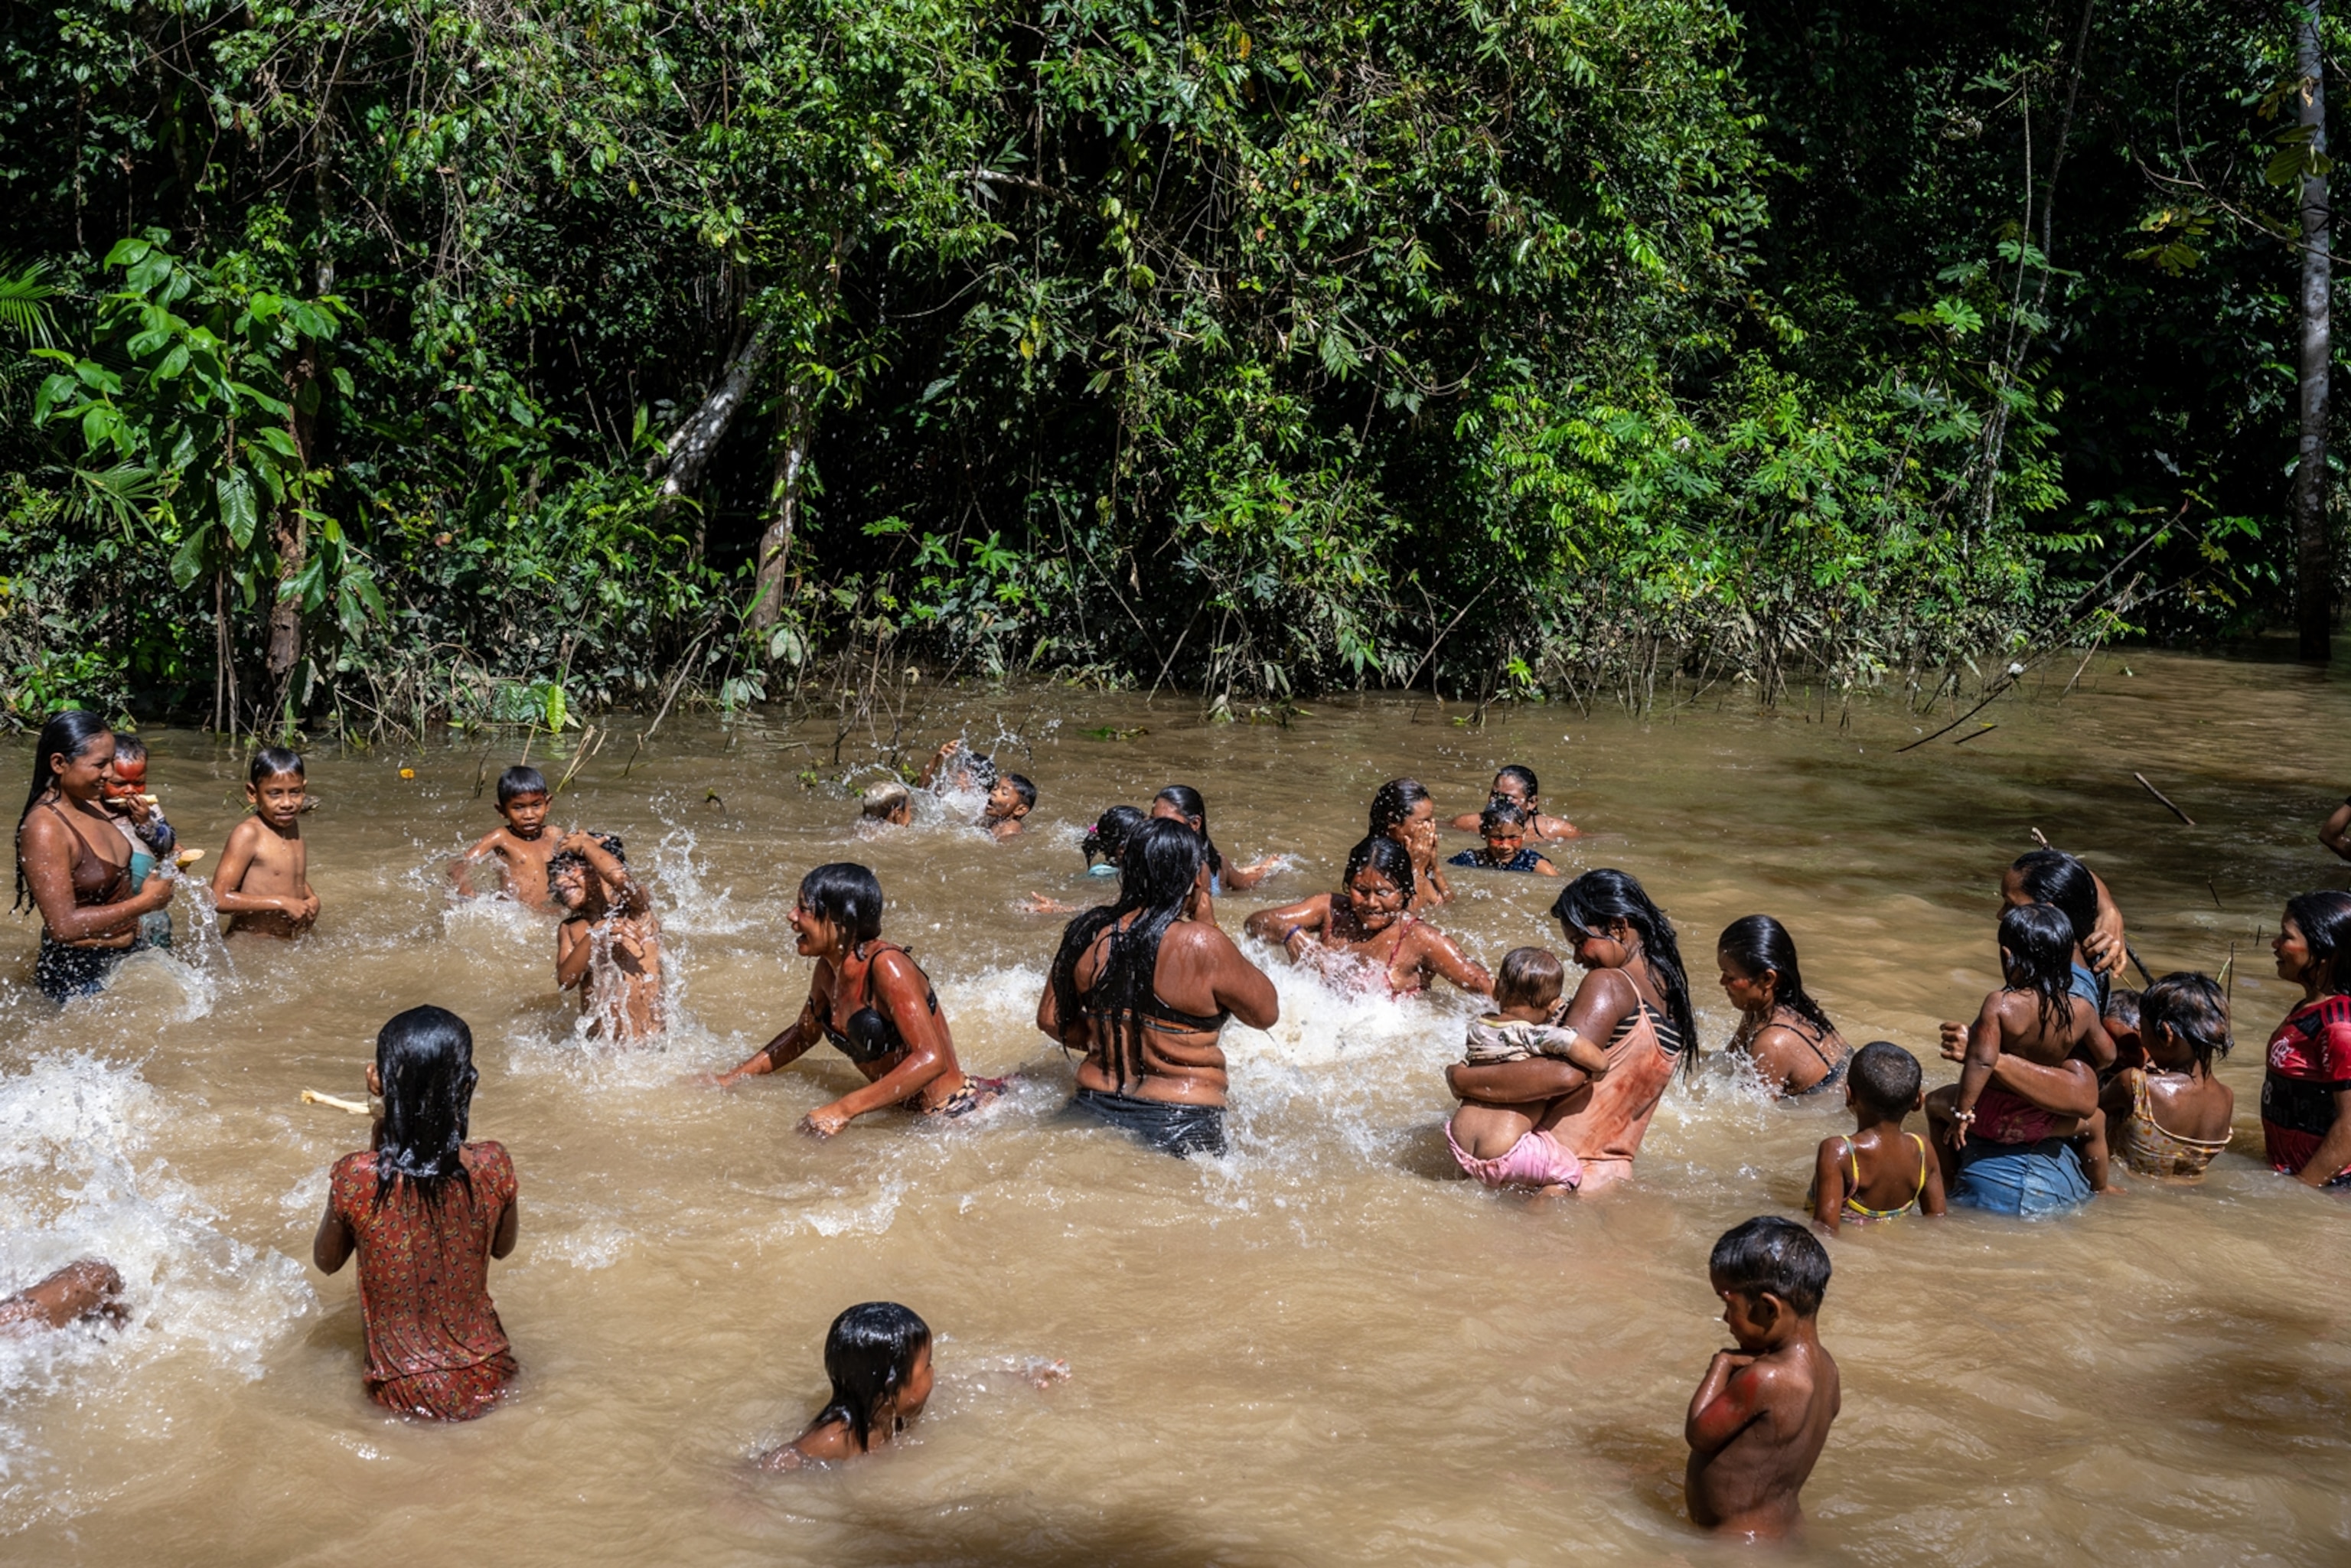 Women and children bathing in murky water by the green wall of the forest.